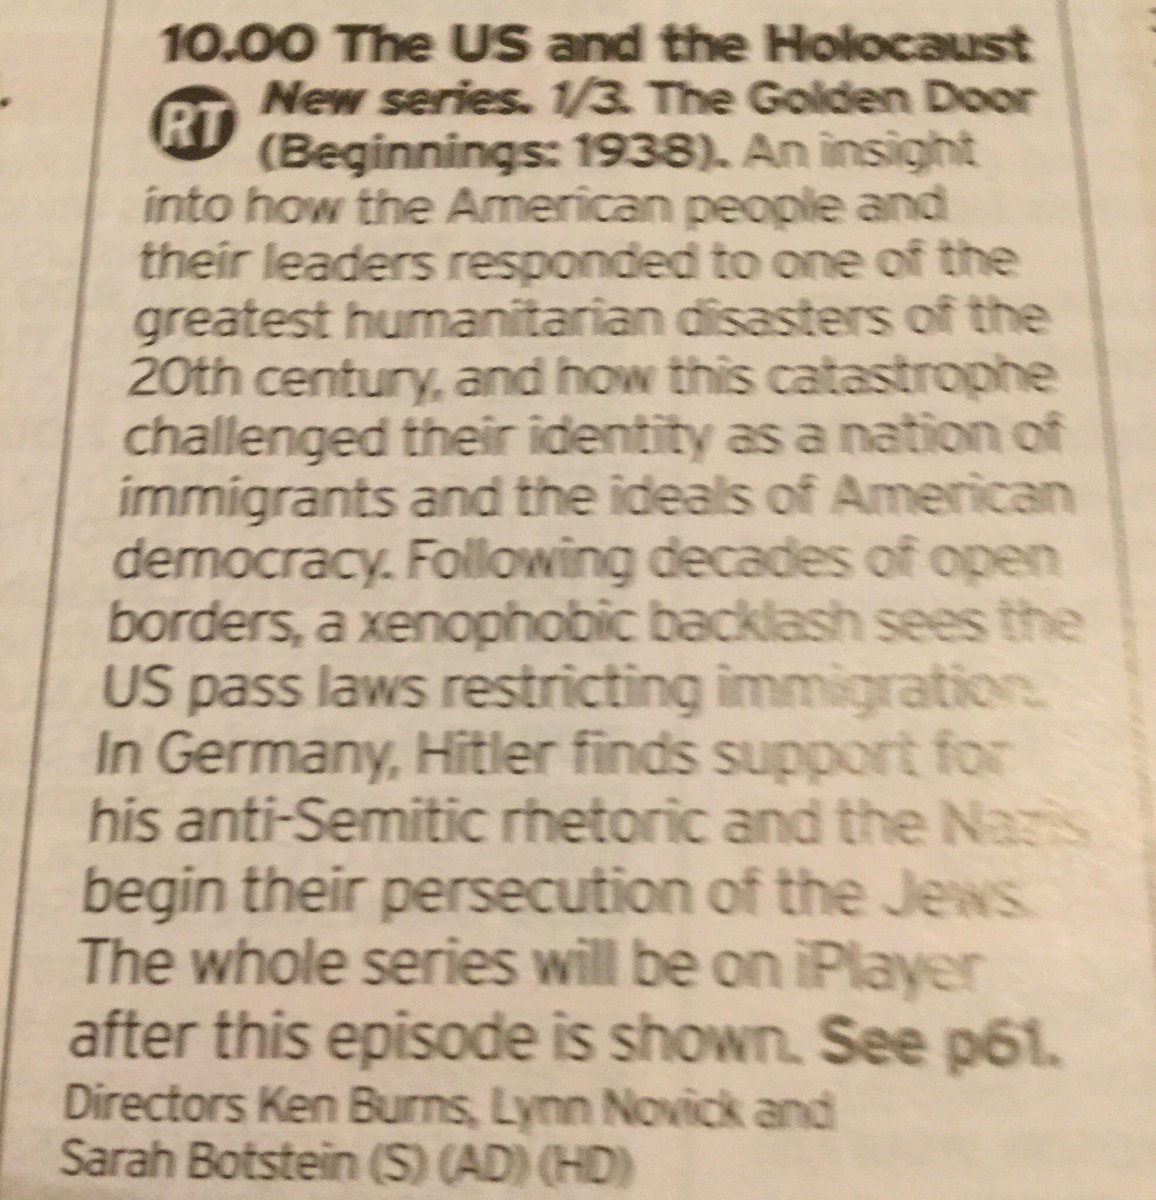 The #KenBurns series on the #AmericanCivilWar was excellent, so I’m definitely tuning in to this at 10pm on BBC4. #TheUSandtheHolocaust #Twitterstorians #TheHolocaust